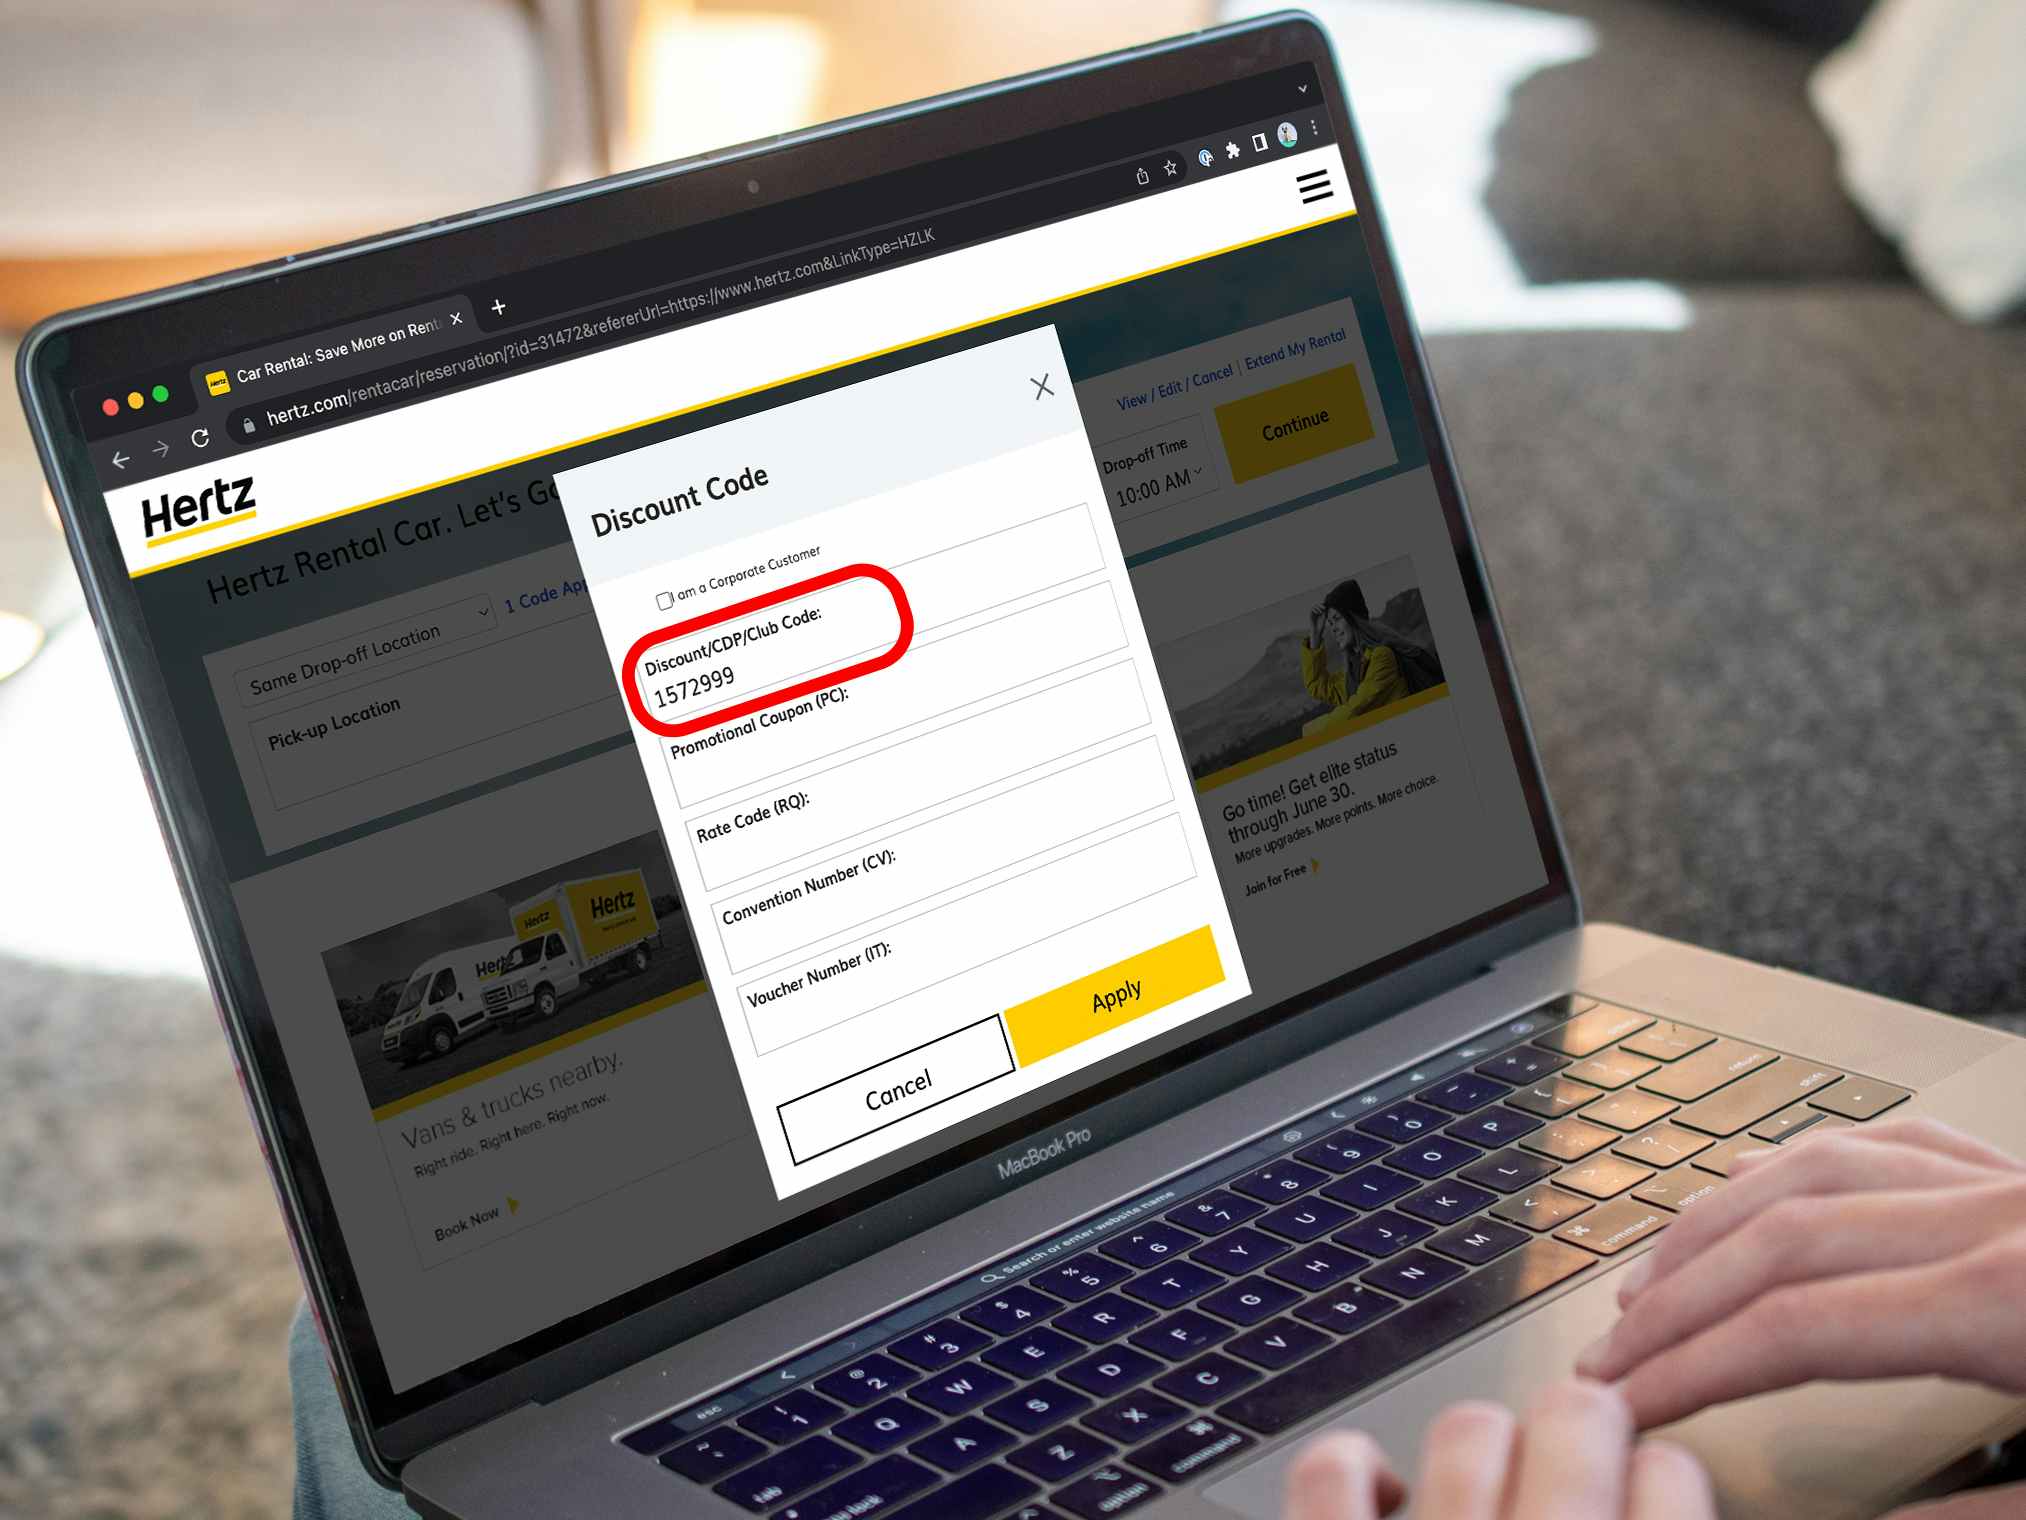 Someone putting in the military discount promo code into the form on Hertz.com